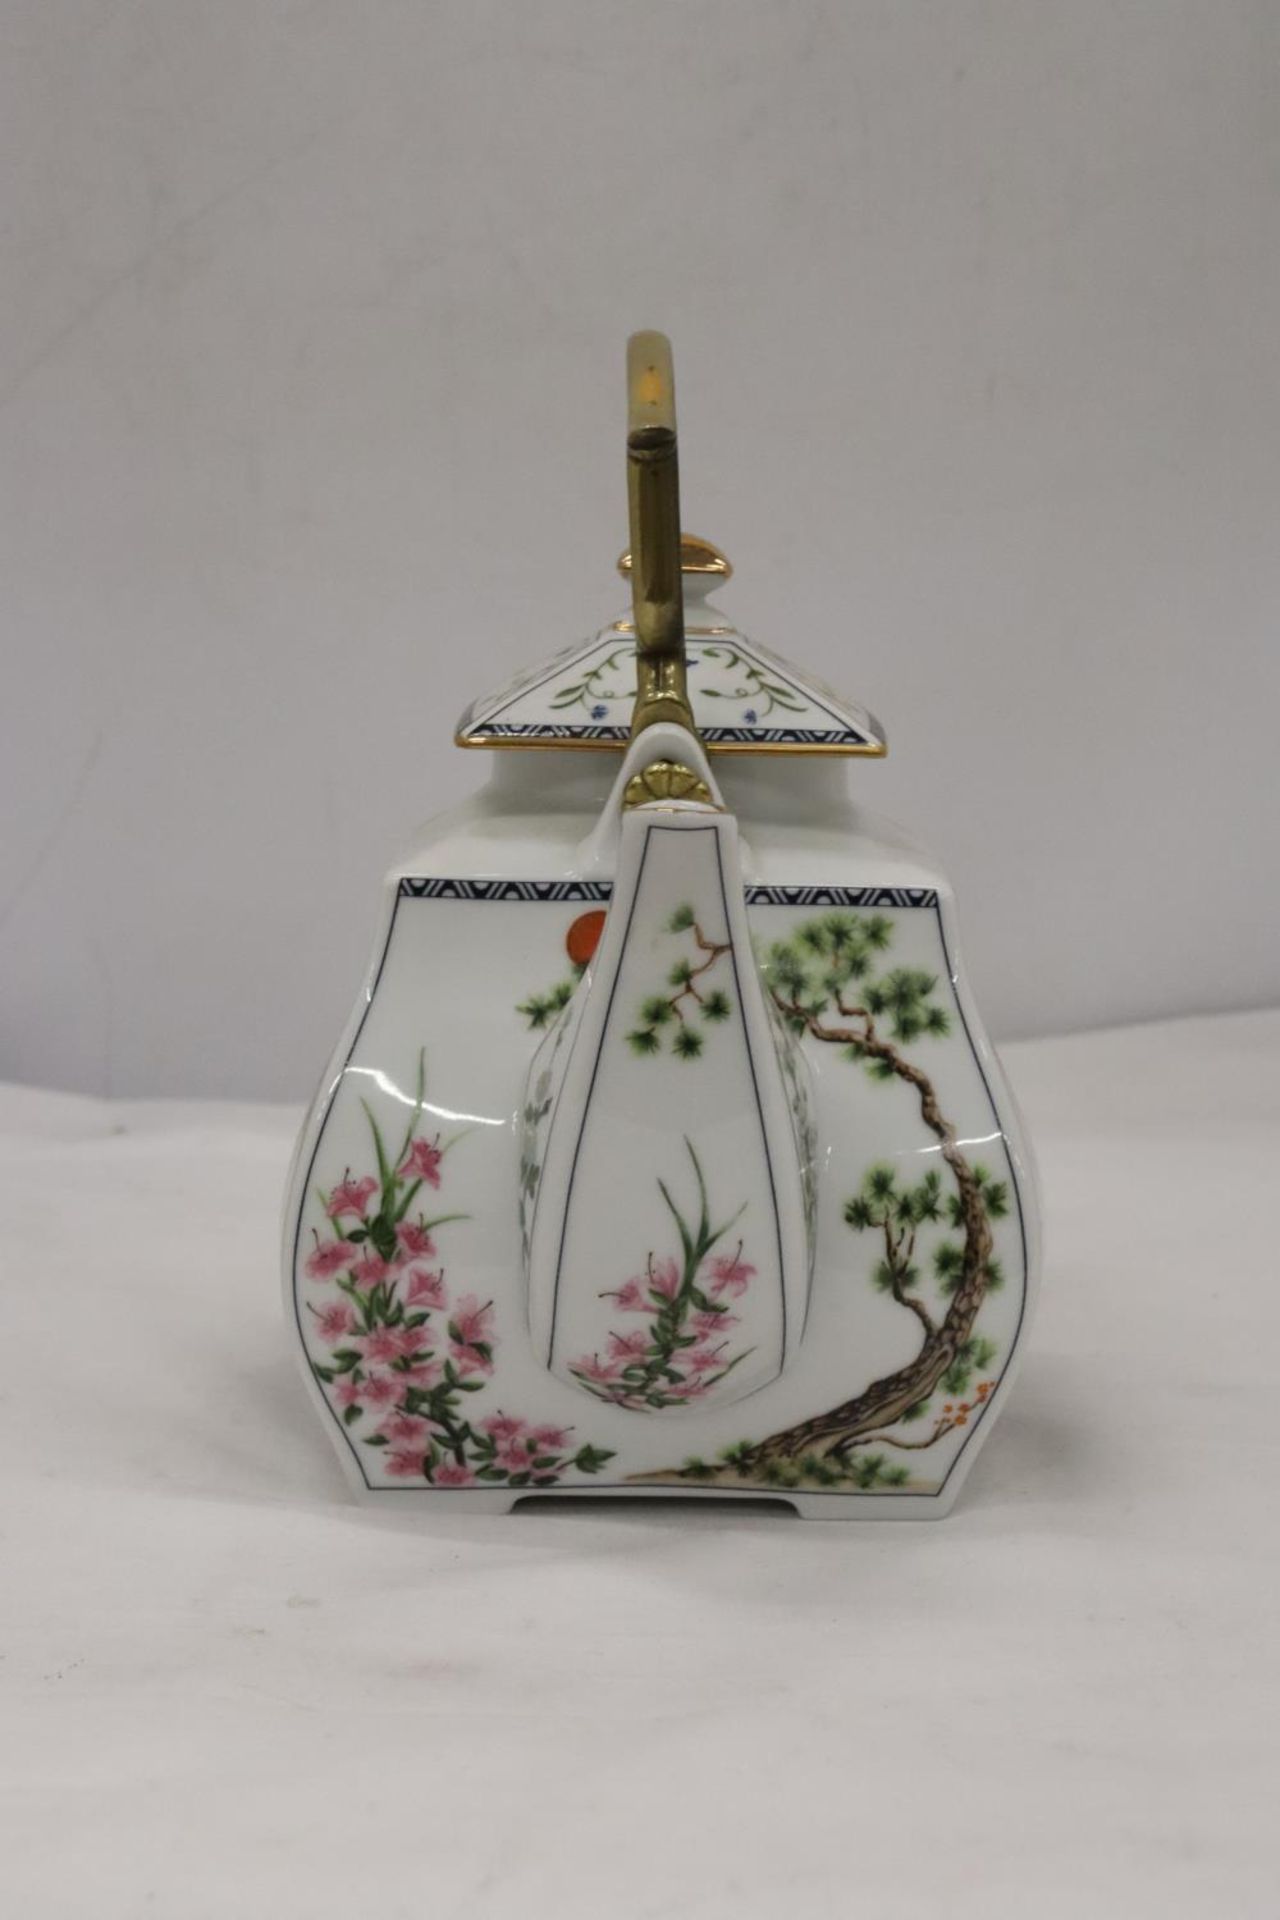 A FRANKLIN PORCELAIN 'THE BIRDS AND FLOWERS OF THE ORIENT' TEAPOT BY NAOKO NOBATA WITH 22CT GOLD - Image 2 of 7